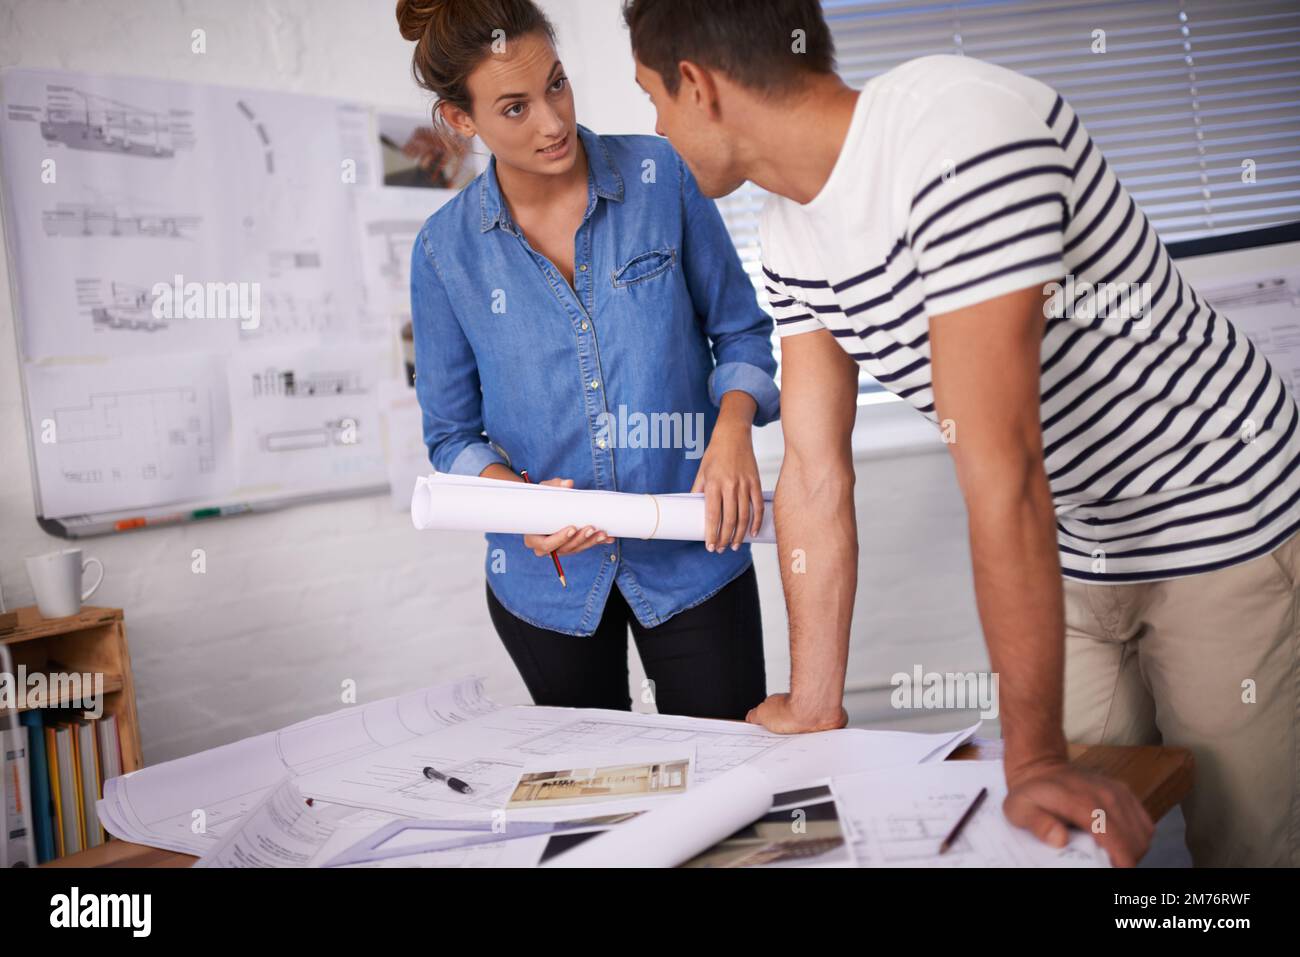 Working late to complete the blueprints. two young designers working together in an office. Stock Photo